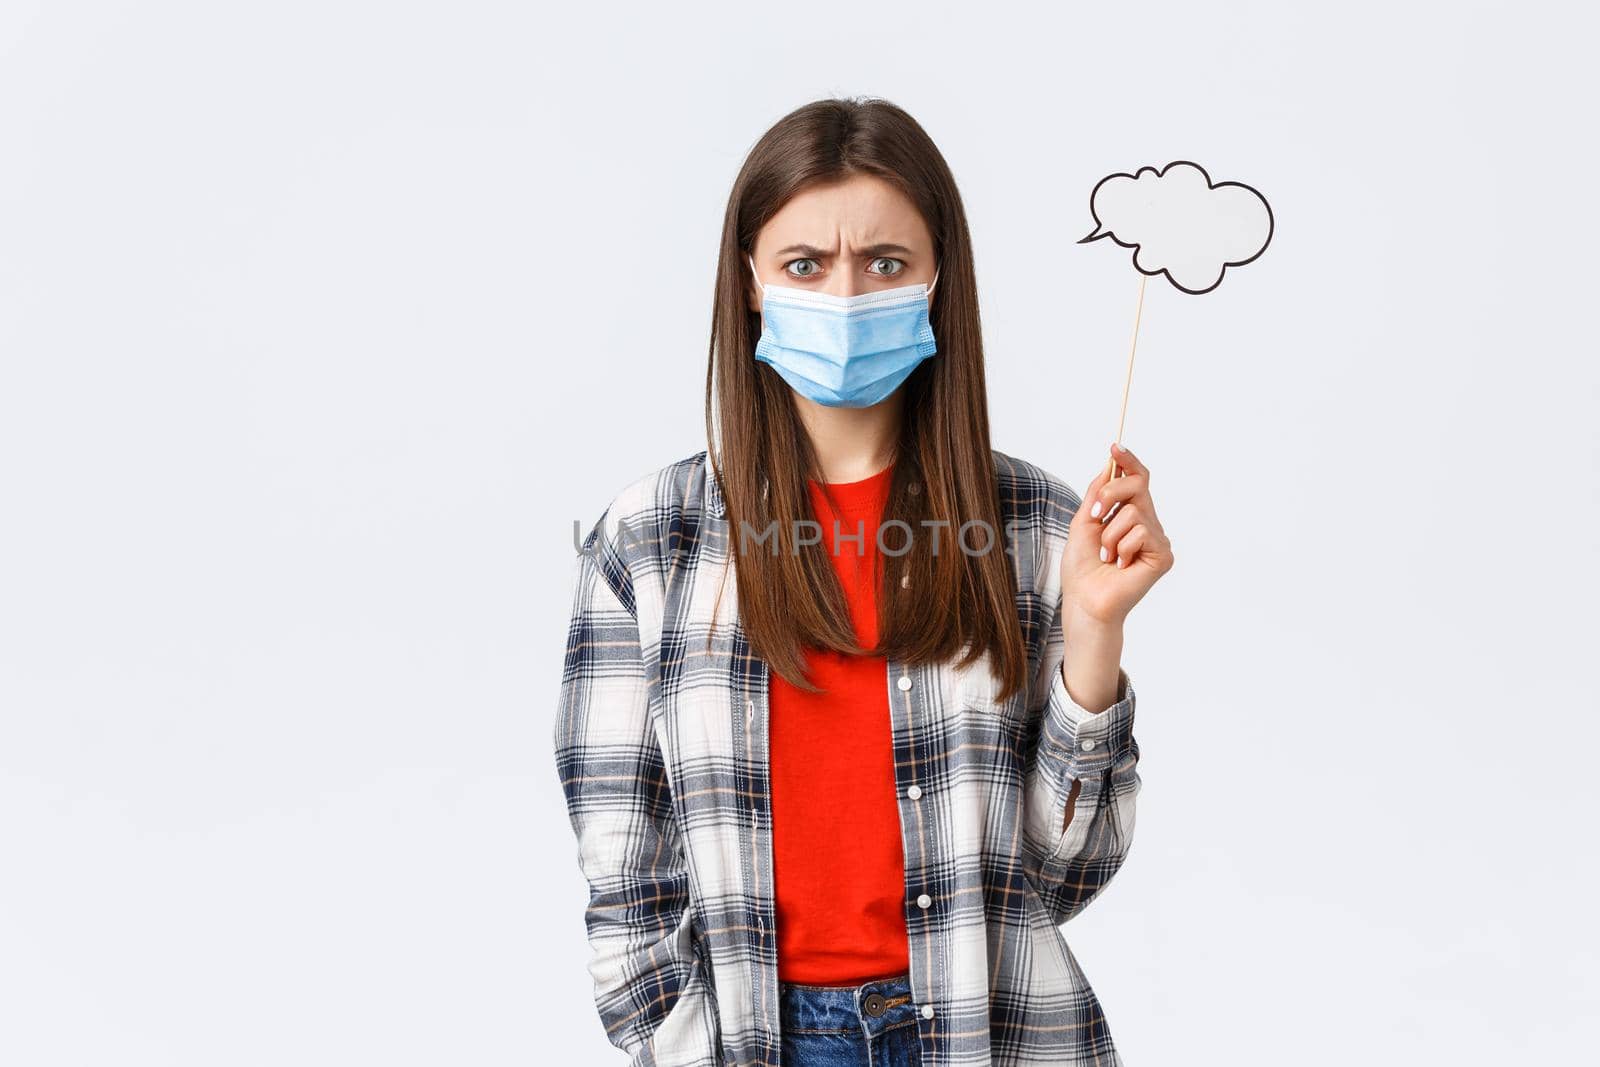 Coronavirus outbreak, leisure on quarantine, social distancing and emotions concept. Troubled young woman in medical mask frowing upset or disappointed, hold comment cloud stick near head.